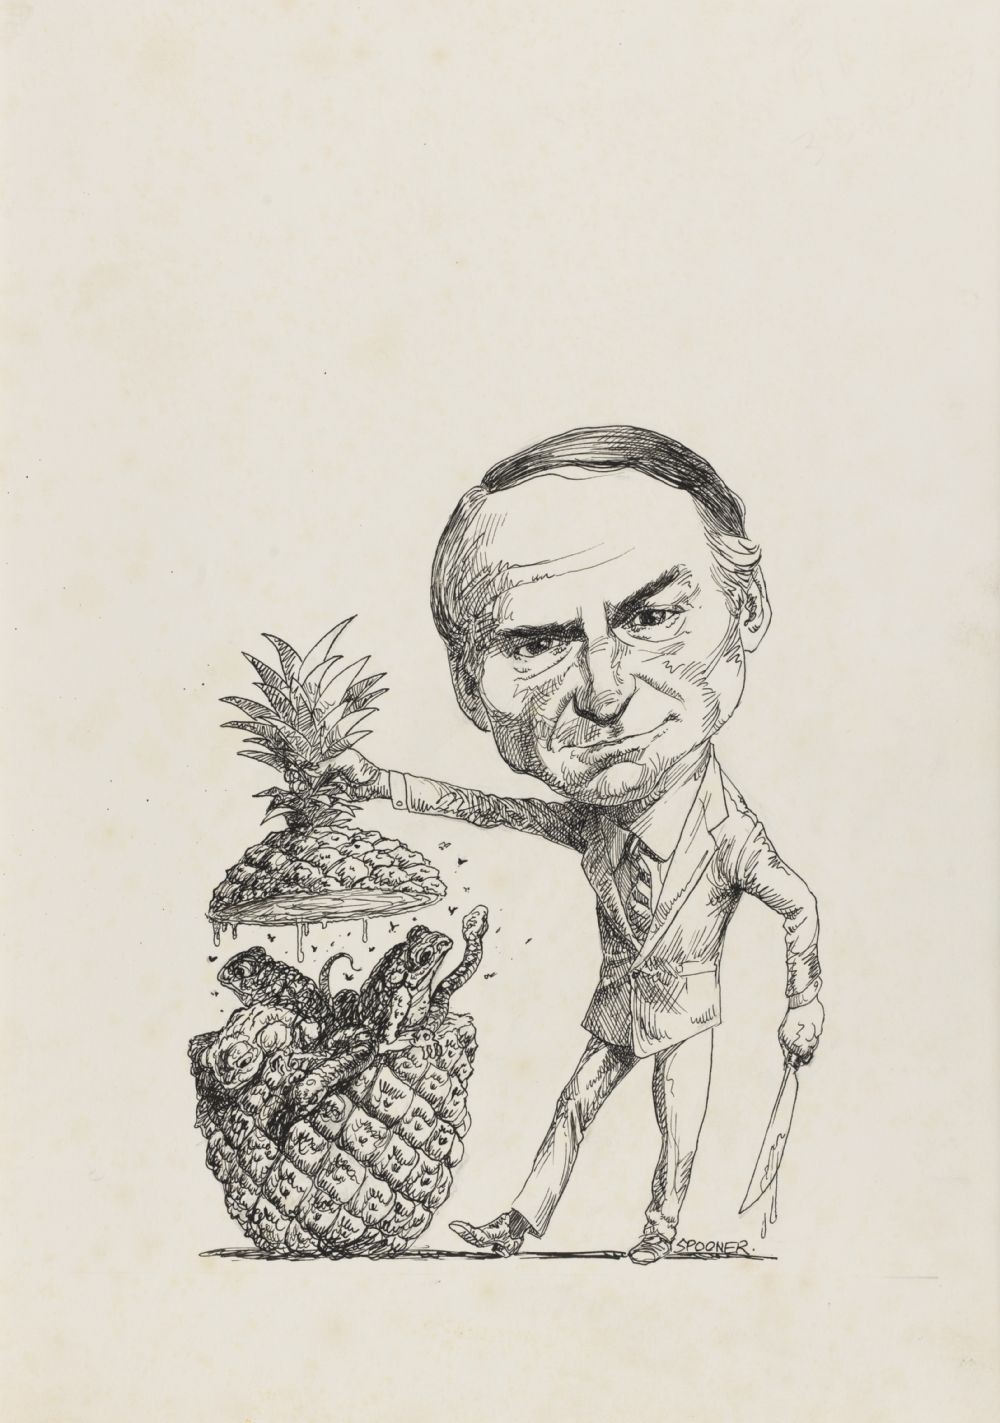  Tony Fitzgerald uncovering corruption in Queensland A pineapple filled with toads and snakes 